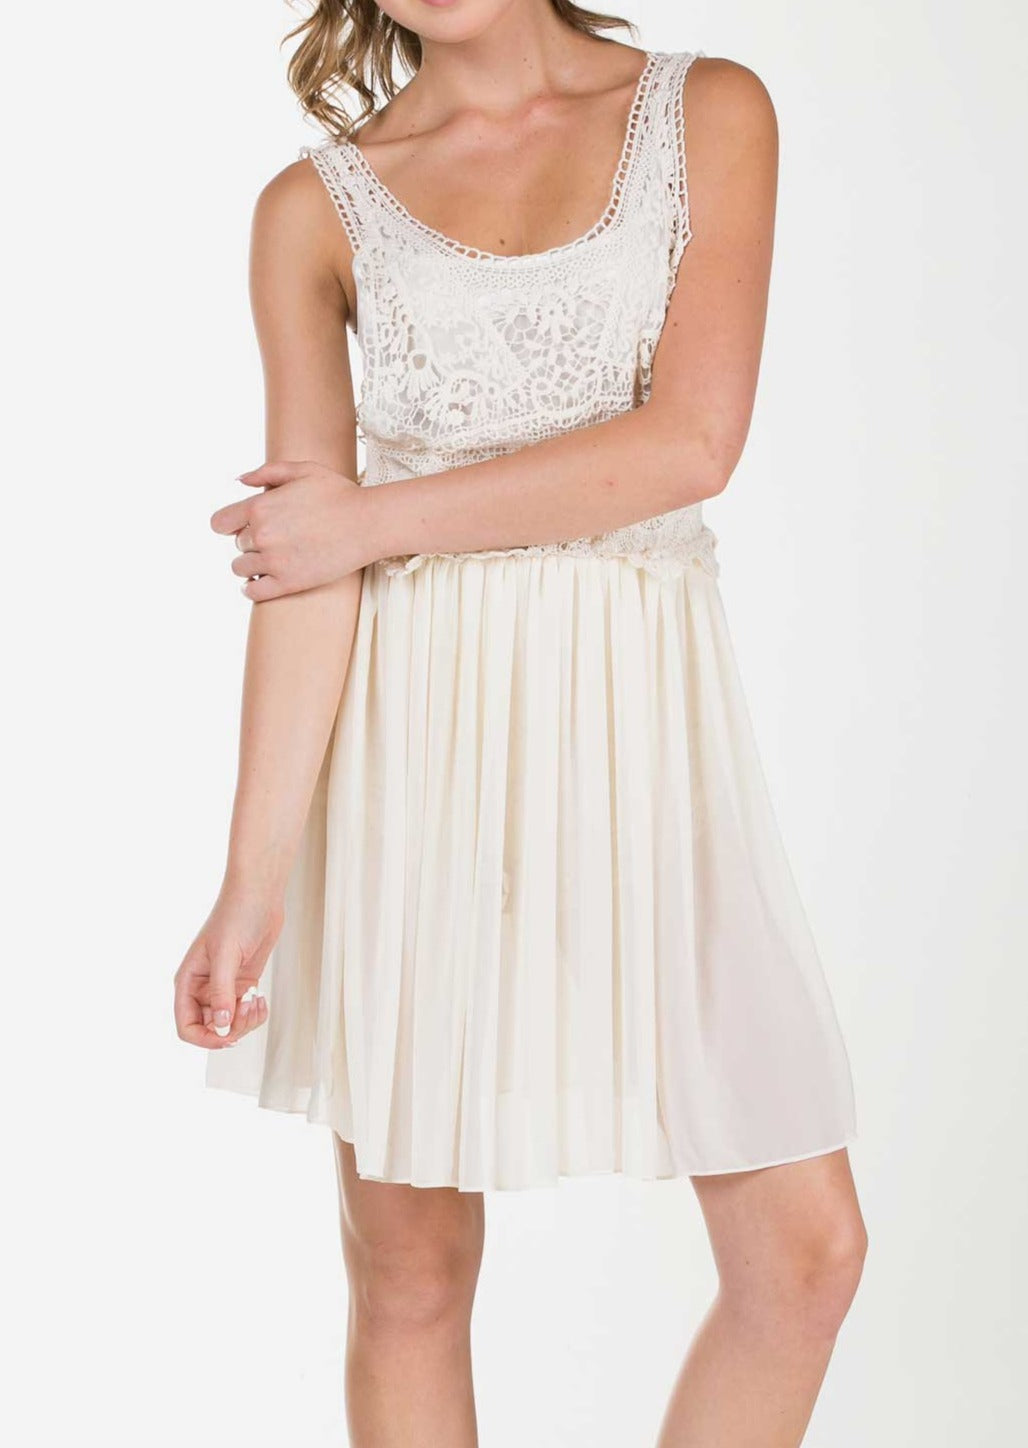 Women's See-through Cotton Lace Top with Midi Skirt Dress - Shop Lev